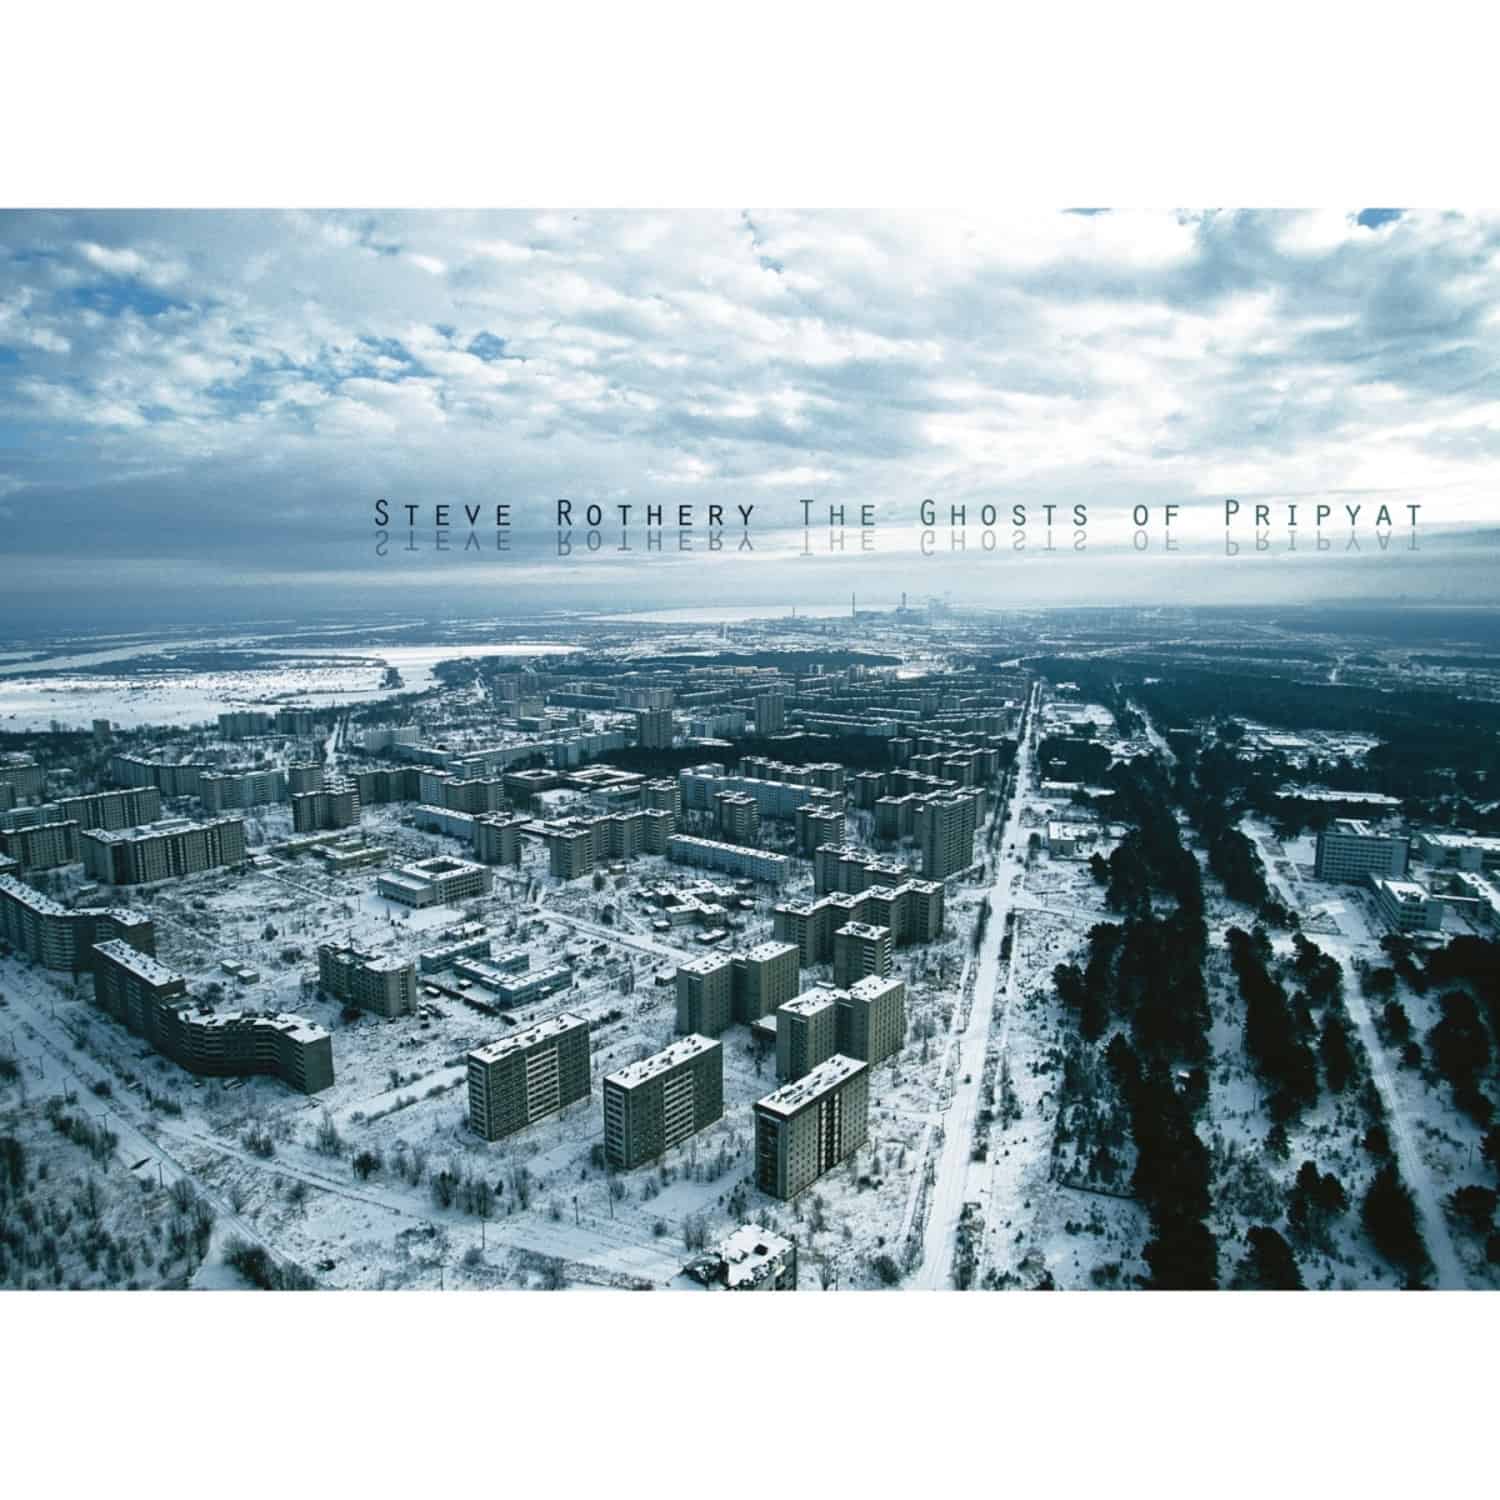  Steve Rothery - THE GHOSTS OF PRIPYAT 